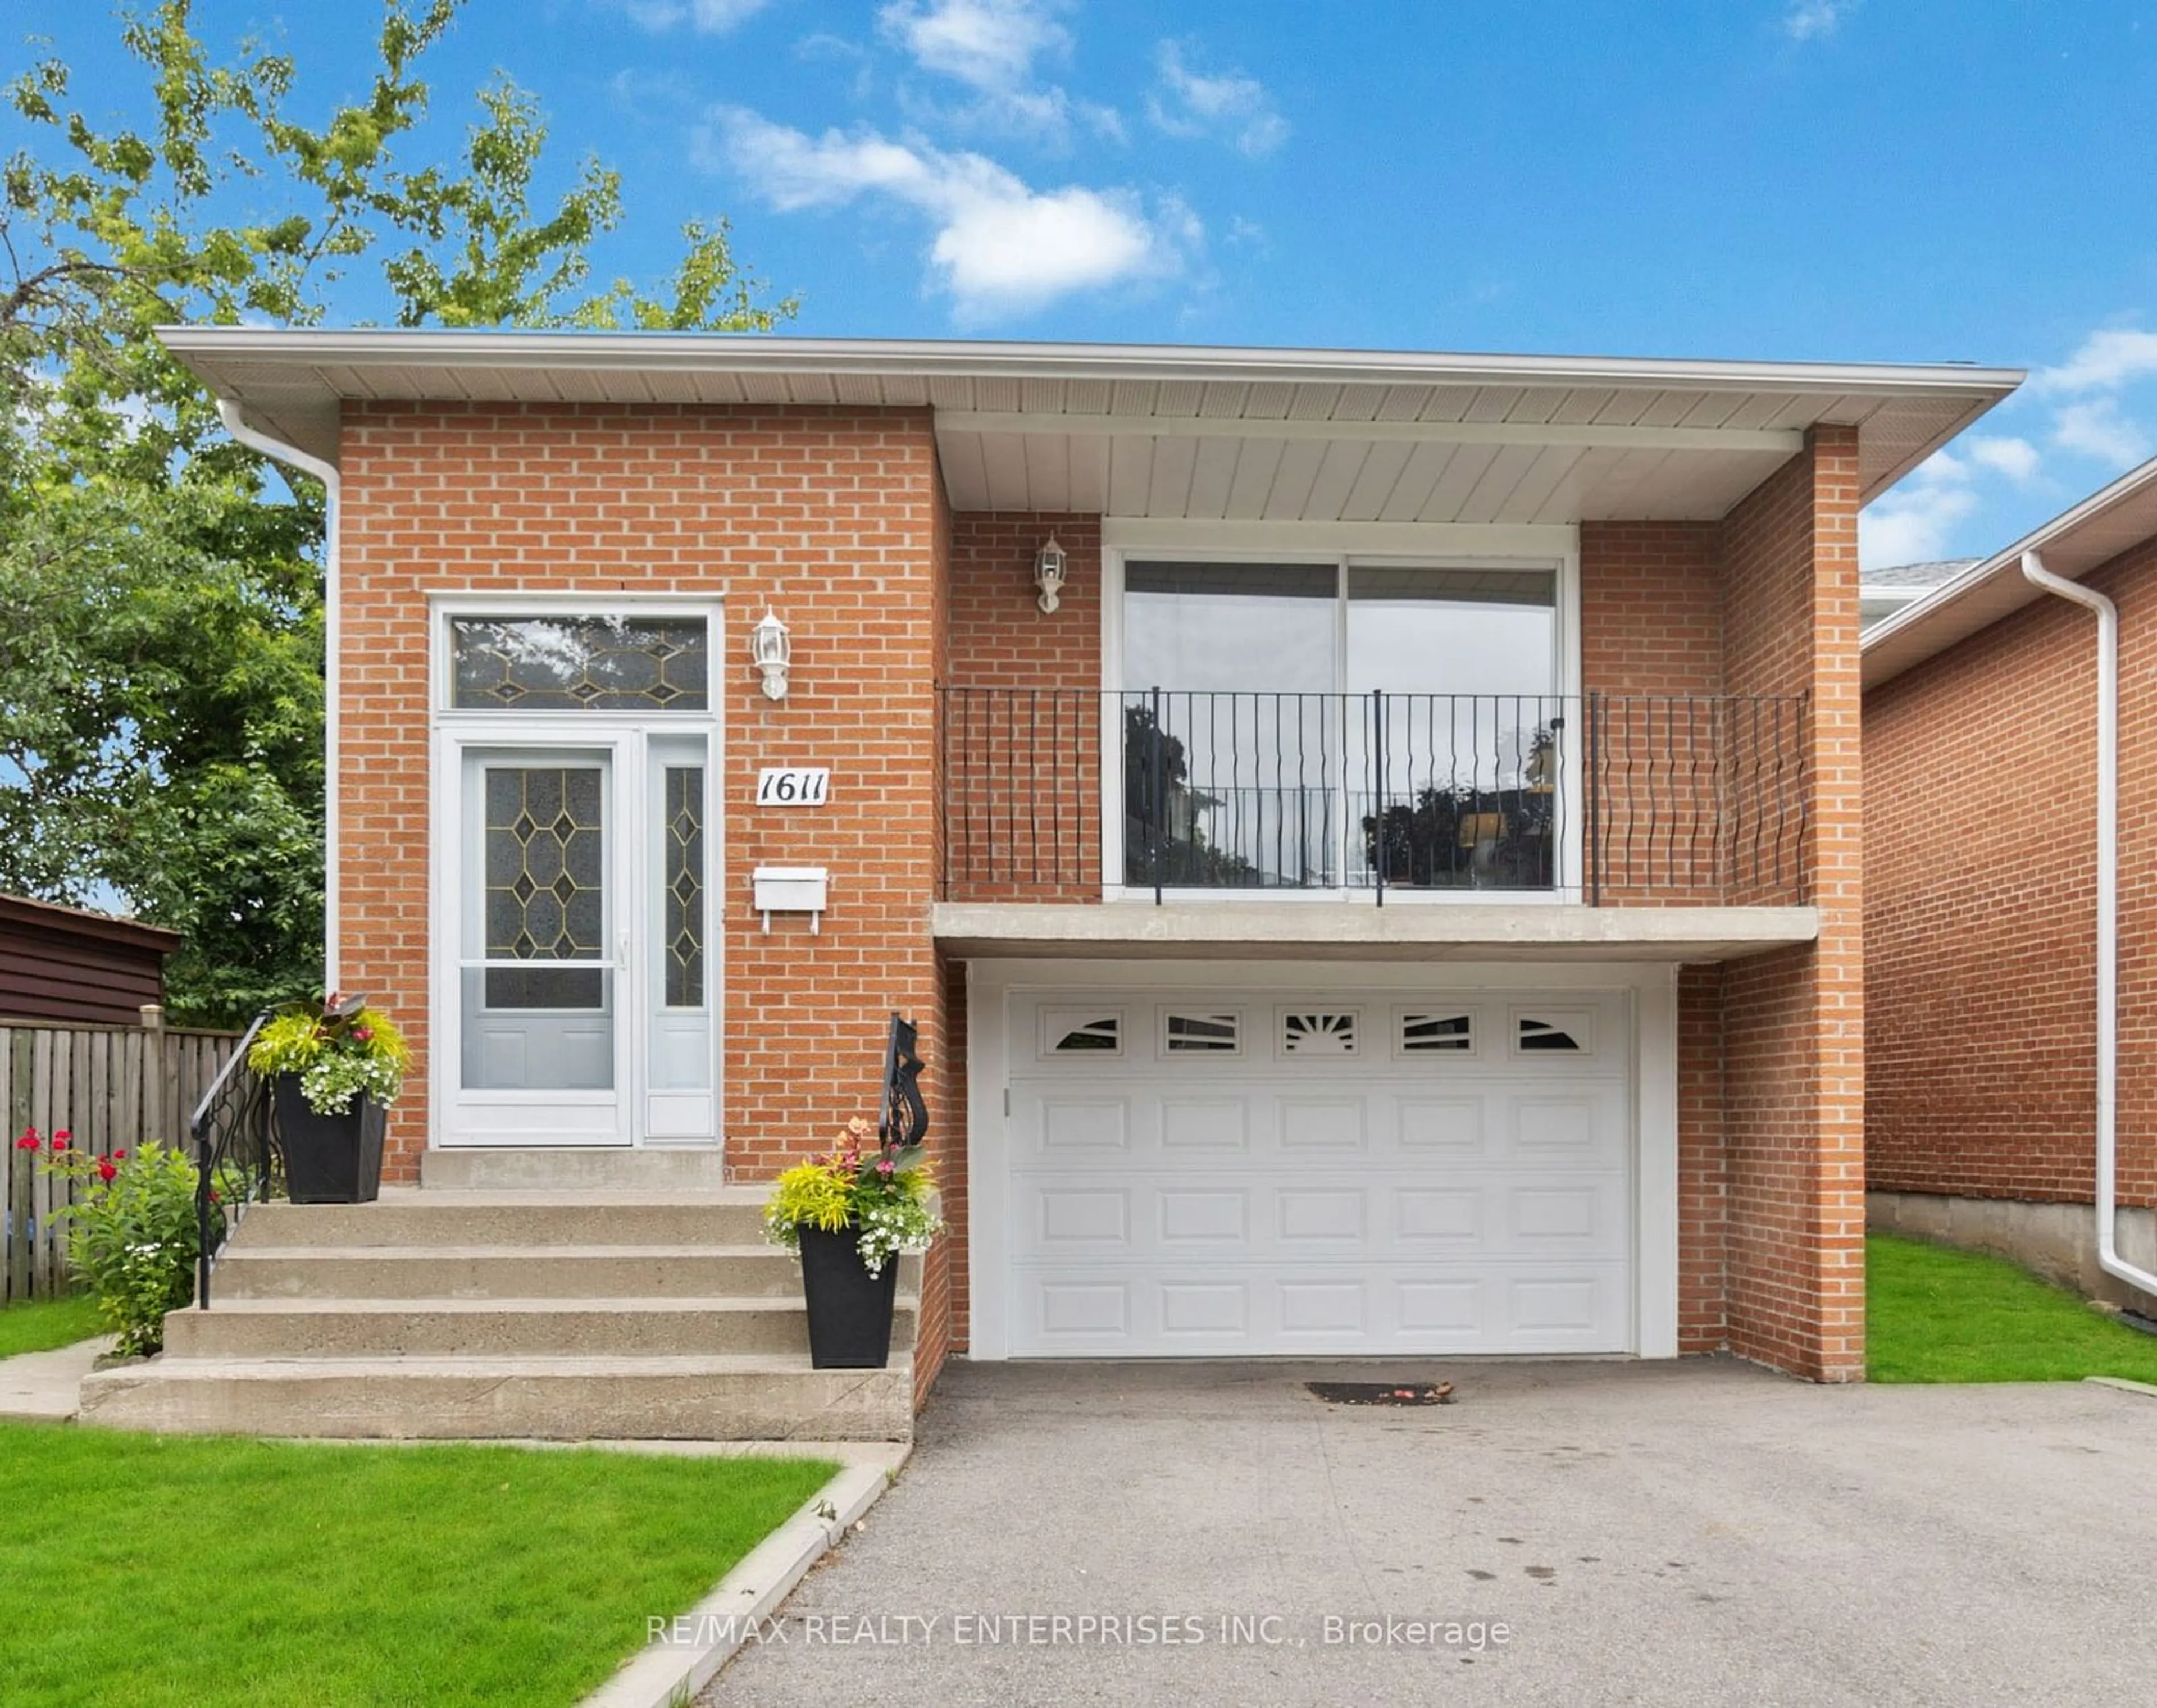 Home with brick exterior material for 1611 Lewes Way, Mississauga Ontario L4W 3H5